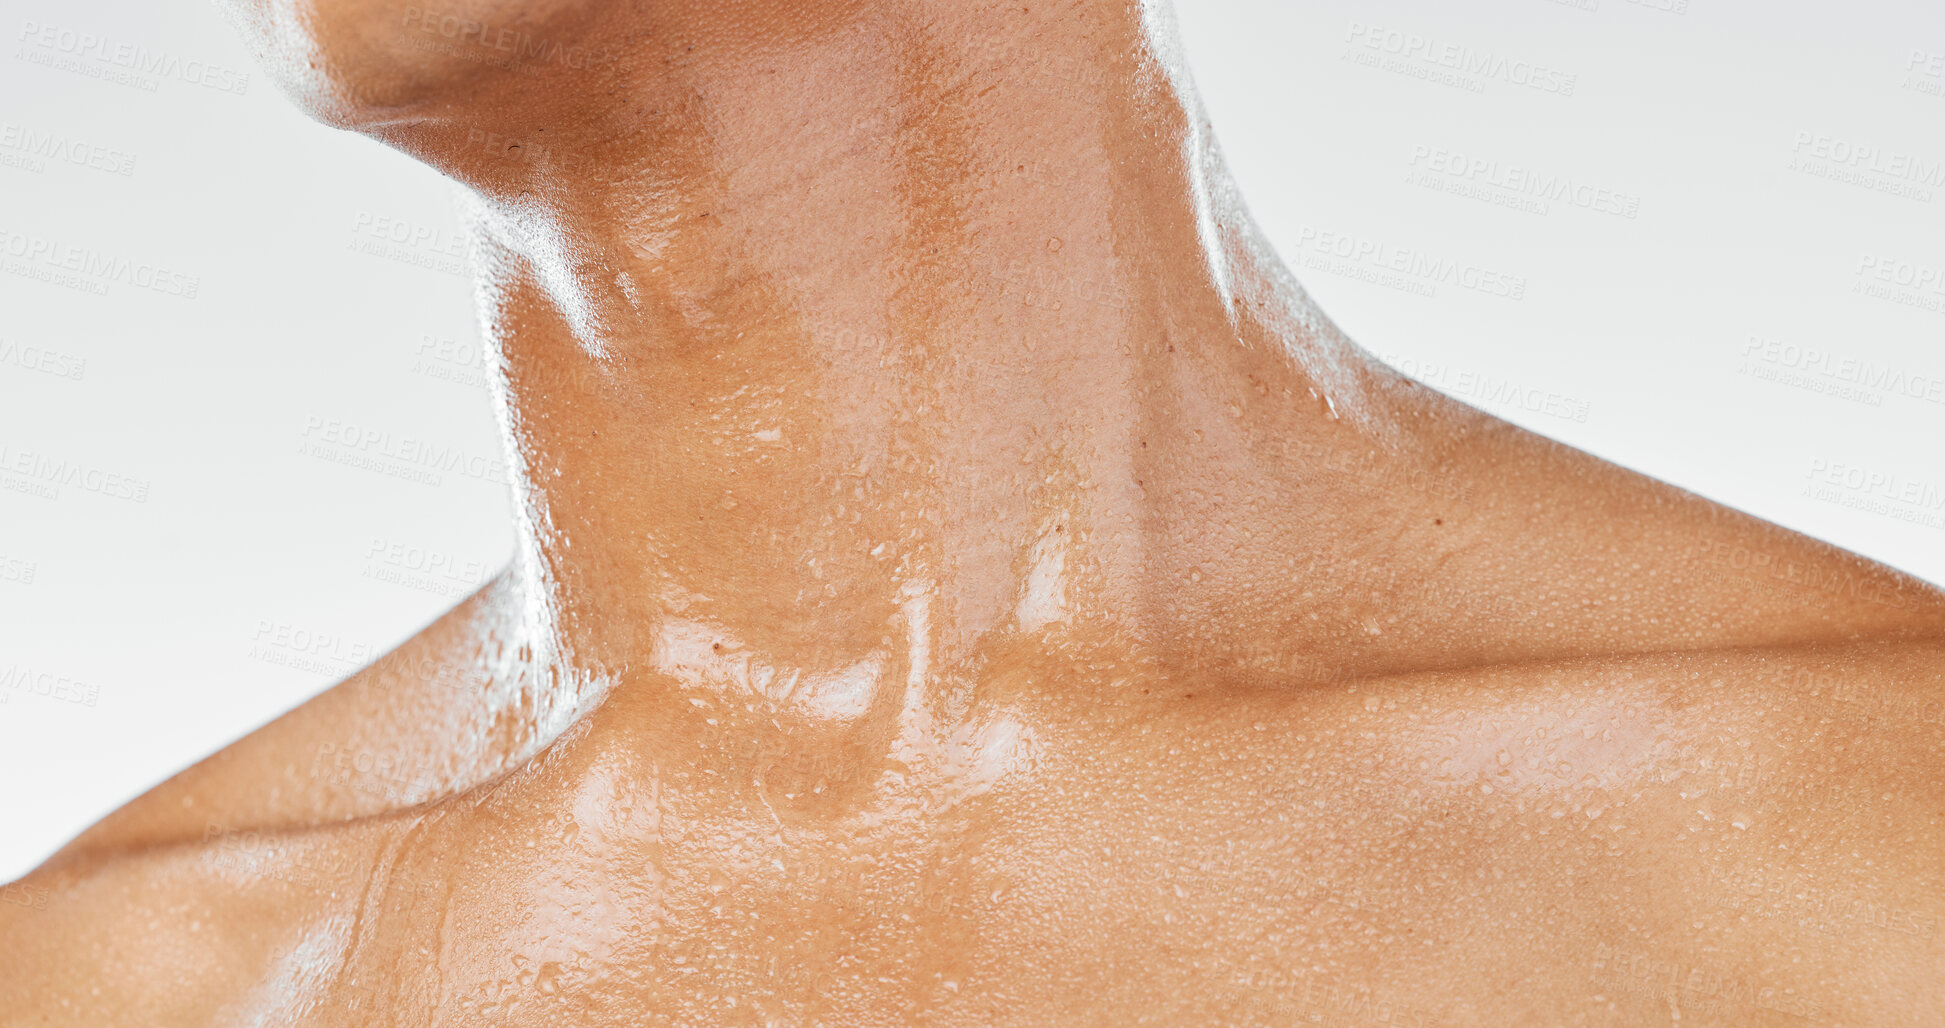 Buy stock photo Body of man sweating from exercise, skin neck with water dripping or wet body cropped on white studio background. Sports person after workout shower, stress hyperhidrosis in men or sports healthcare